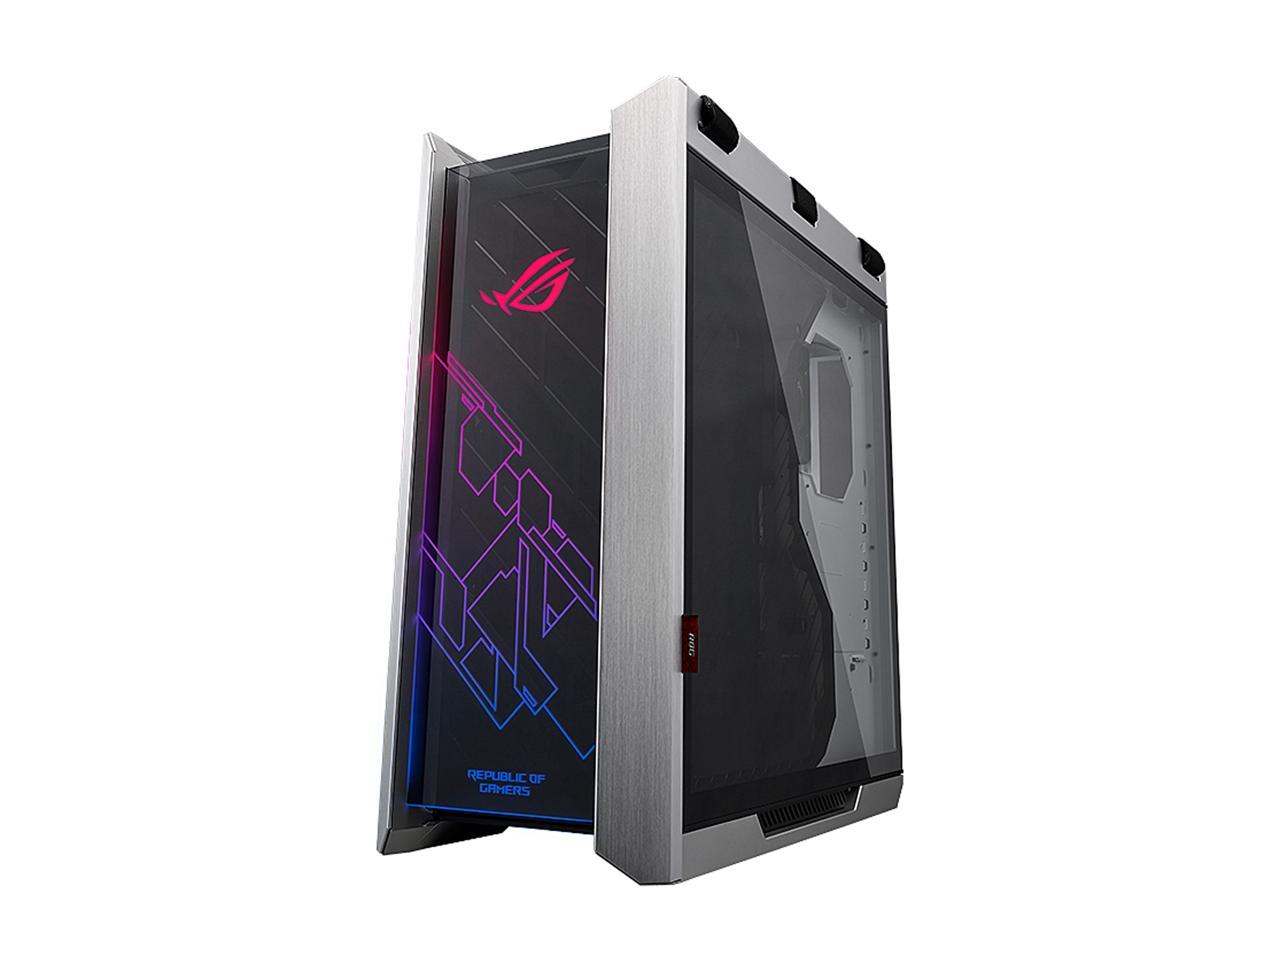 ASUS ROG Strix Helios GX601 White Edition RGB Mid-Tower Computer Case for ATX/ EATX Motherboards with Tempered Glass, Aluminum Frame, GPU Braces, 420mm Radiator Support and Aura Sync - image 3 of 5